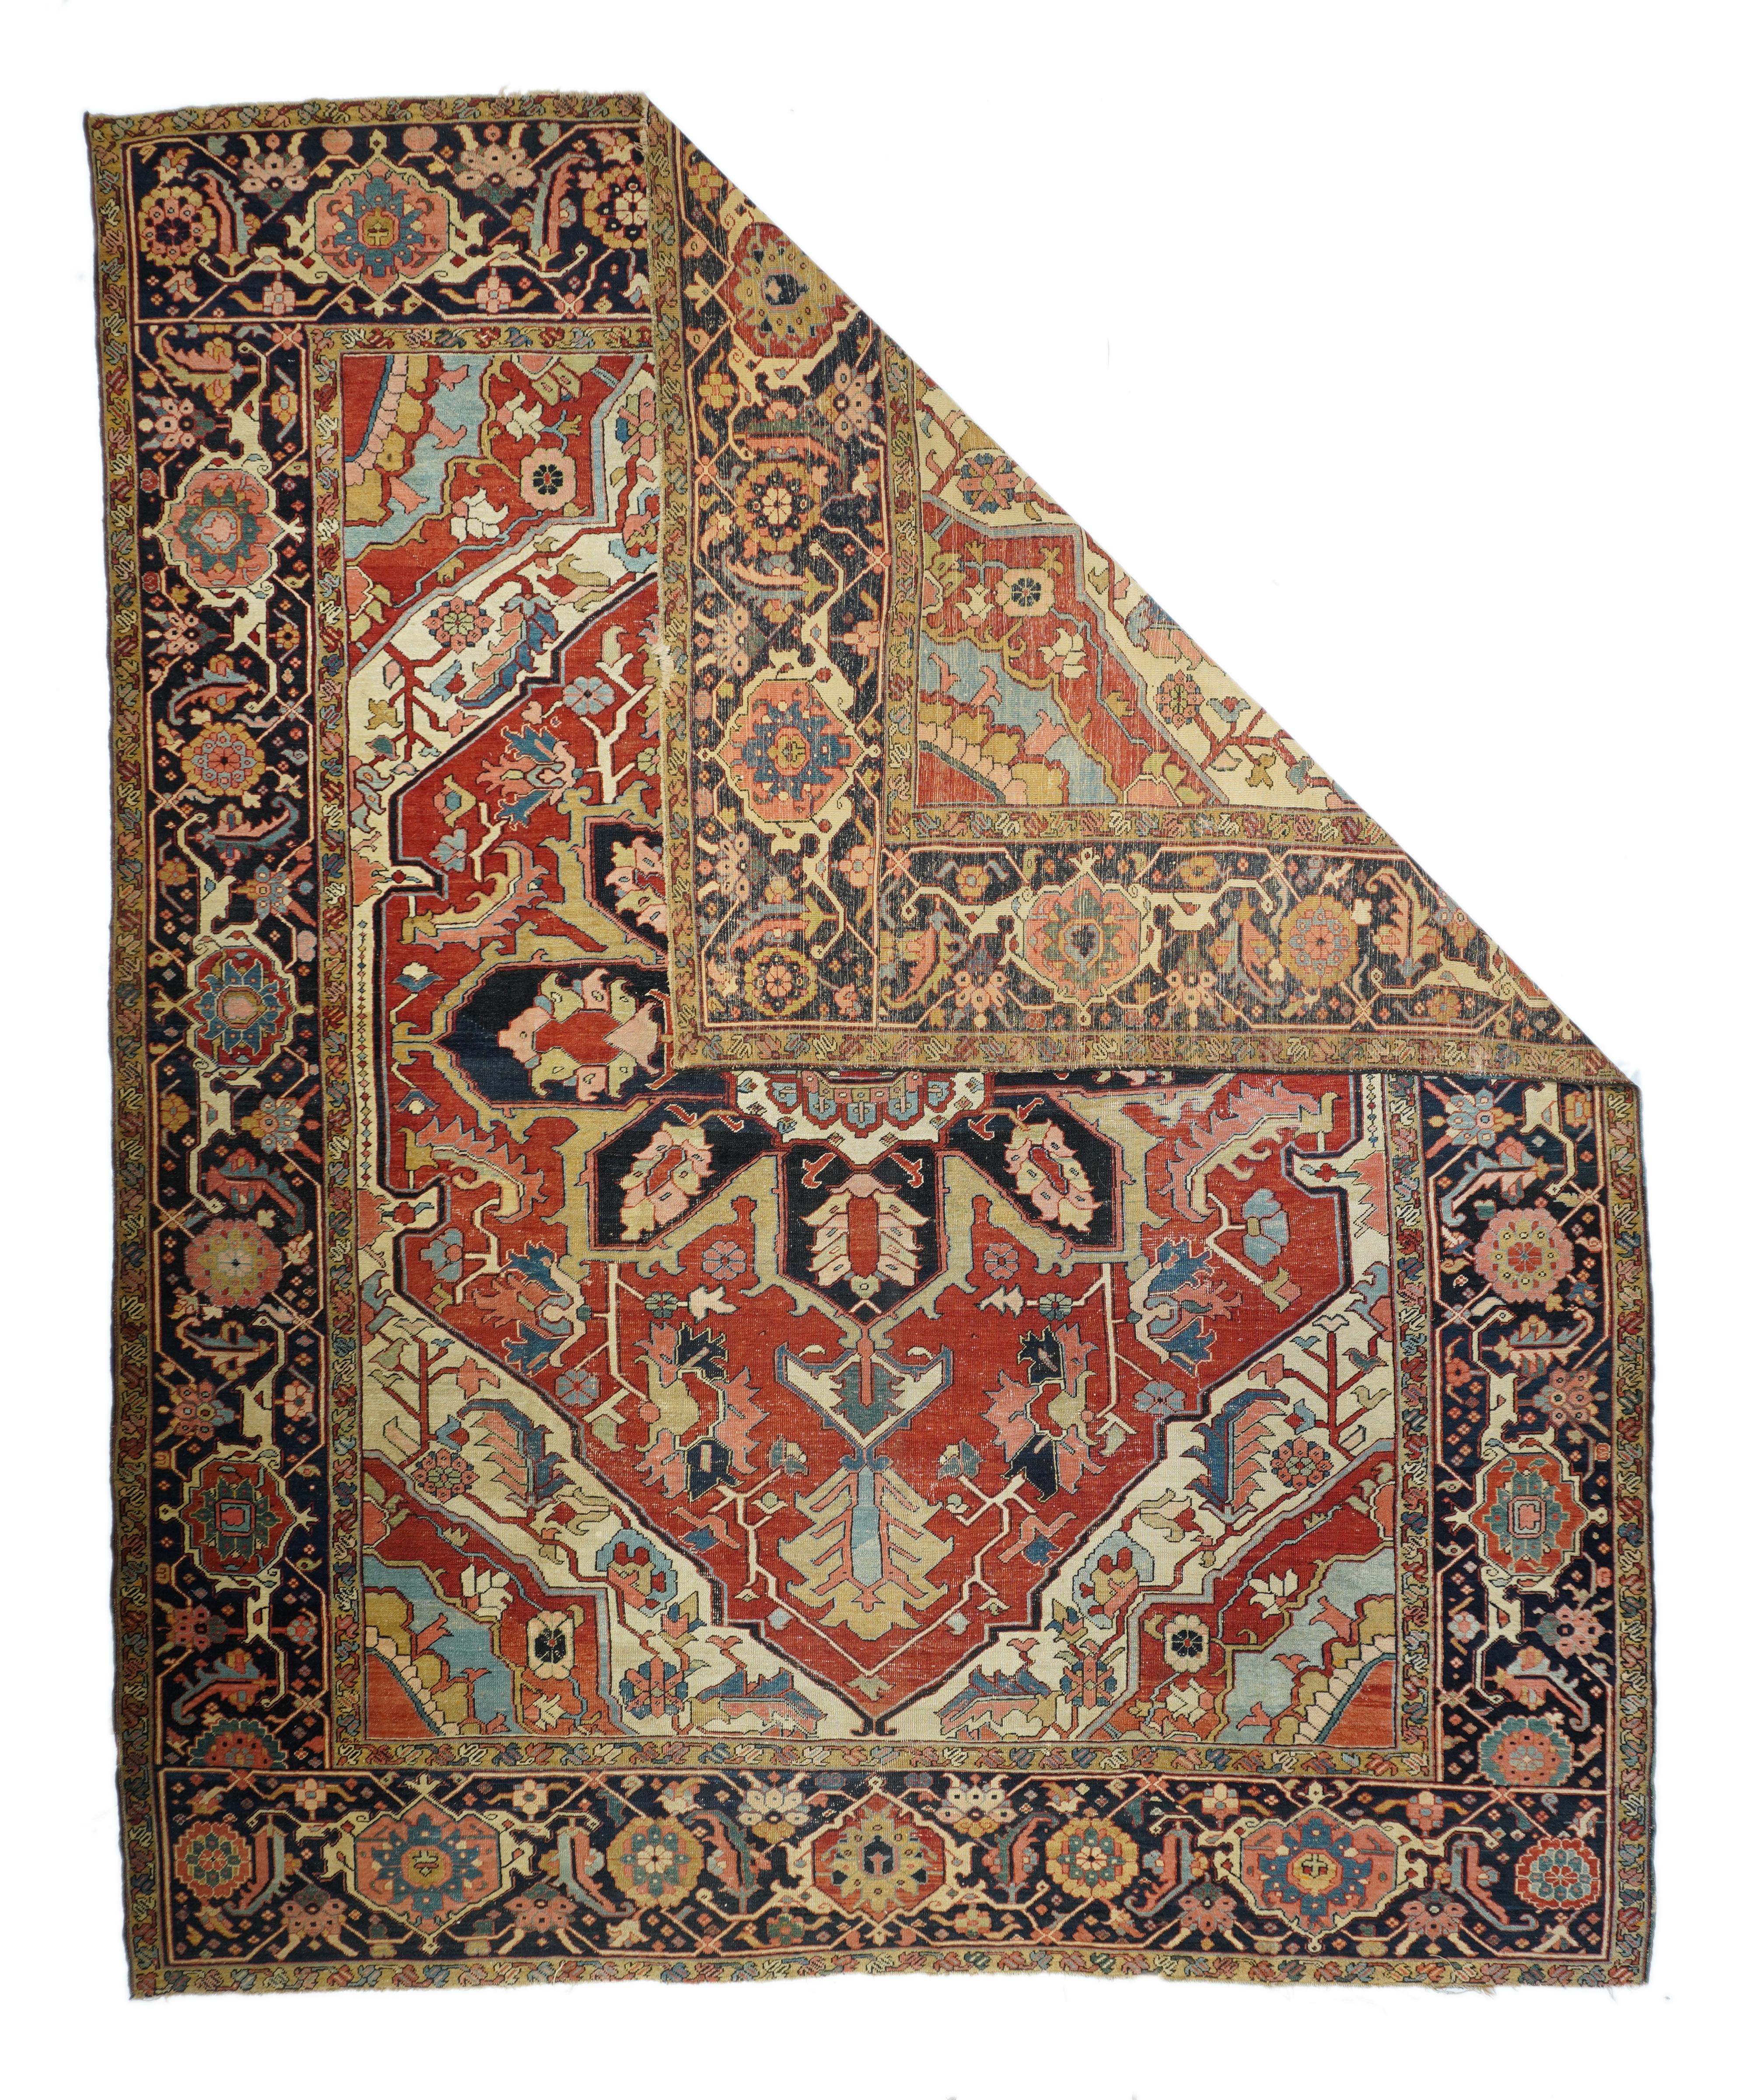 Antique Serapi rug measures 10' x 12'3''. This antique NW Persian village carpet shows the characteristic red/navy/cream palette manifested in an equally pattern of a powerful eight palmette navy octofoil medallion with a ragged cream sub-medallion,